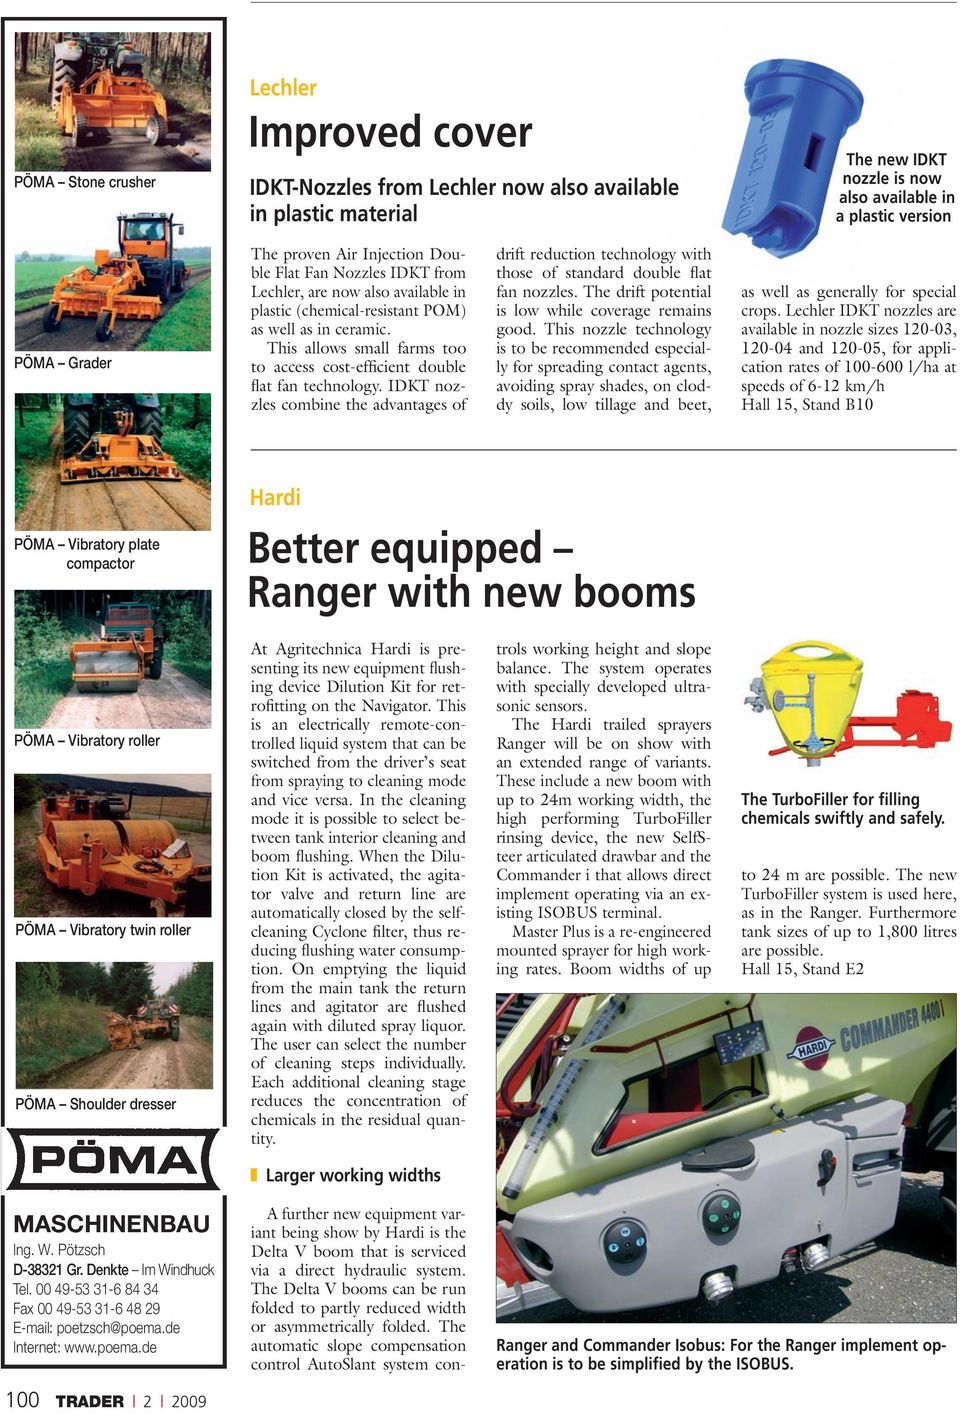 Improved cover. Better equipped with new booms - PDF